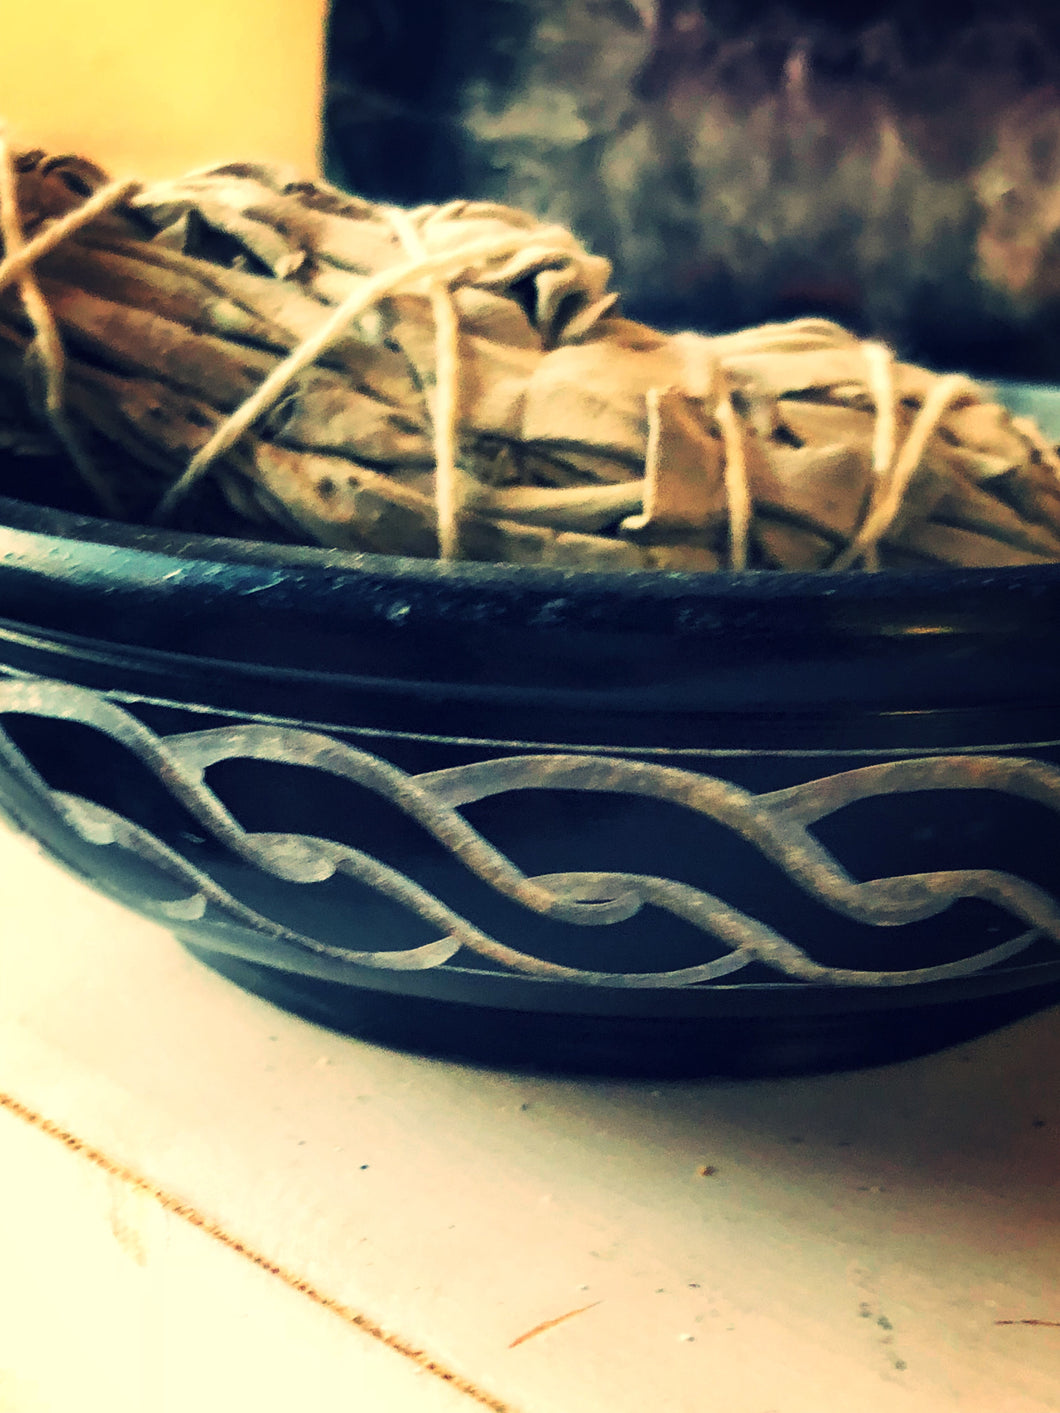 Ceramic Celtic Scrying or Smudge Bowl